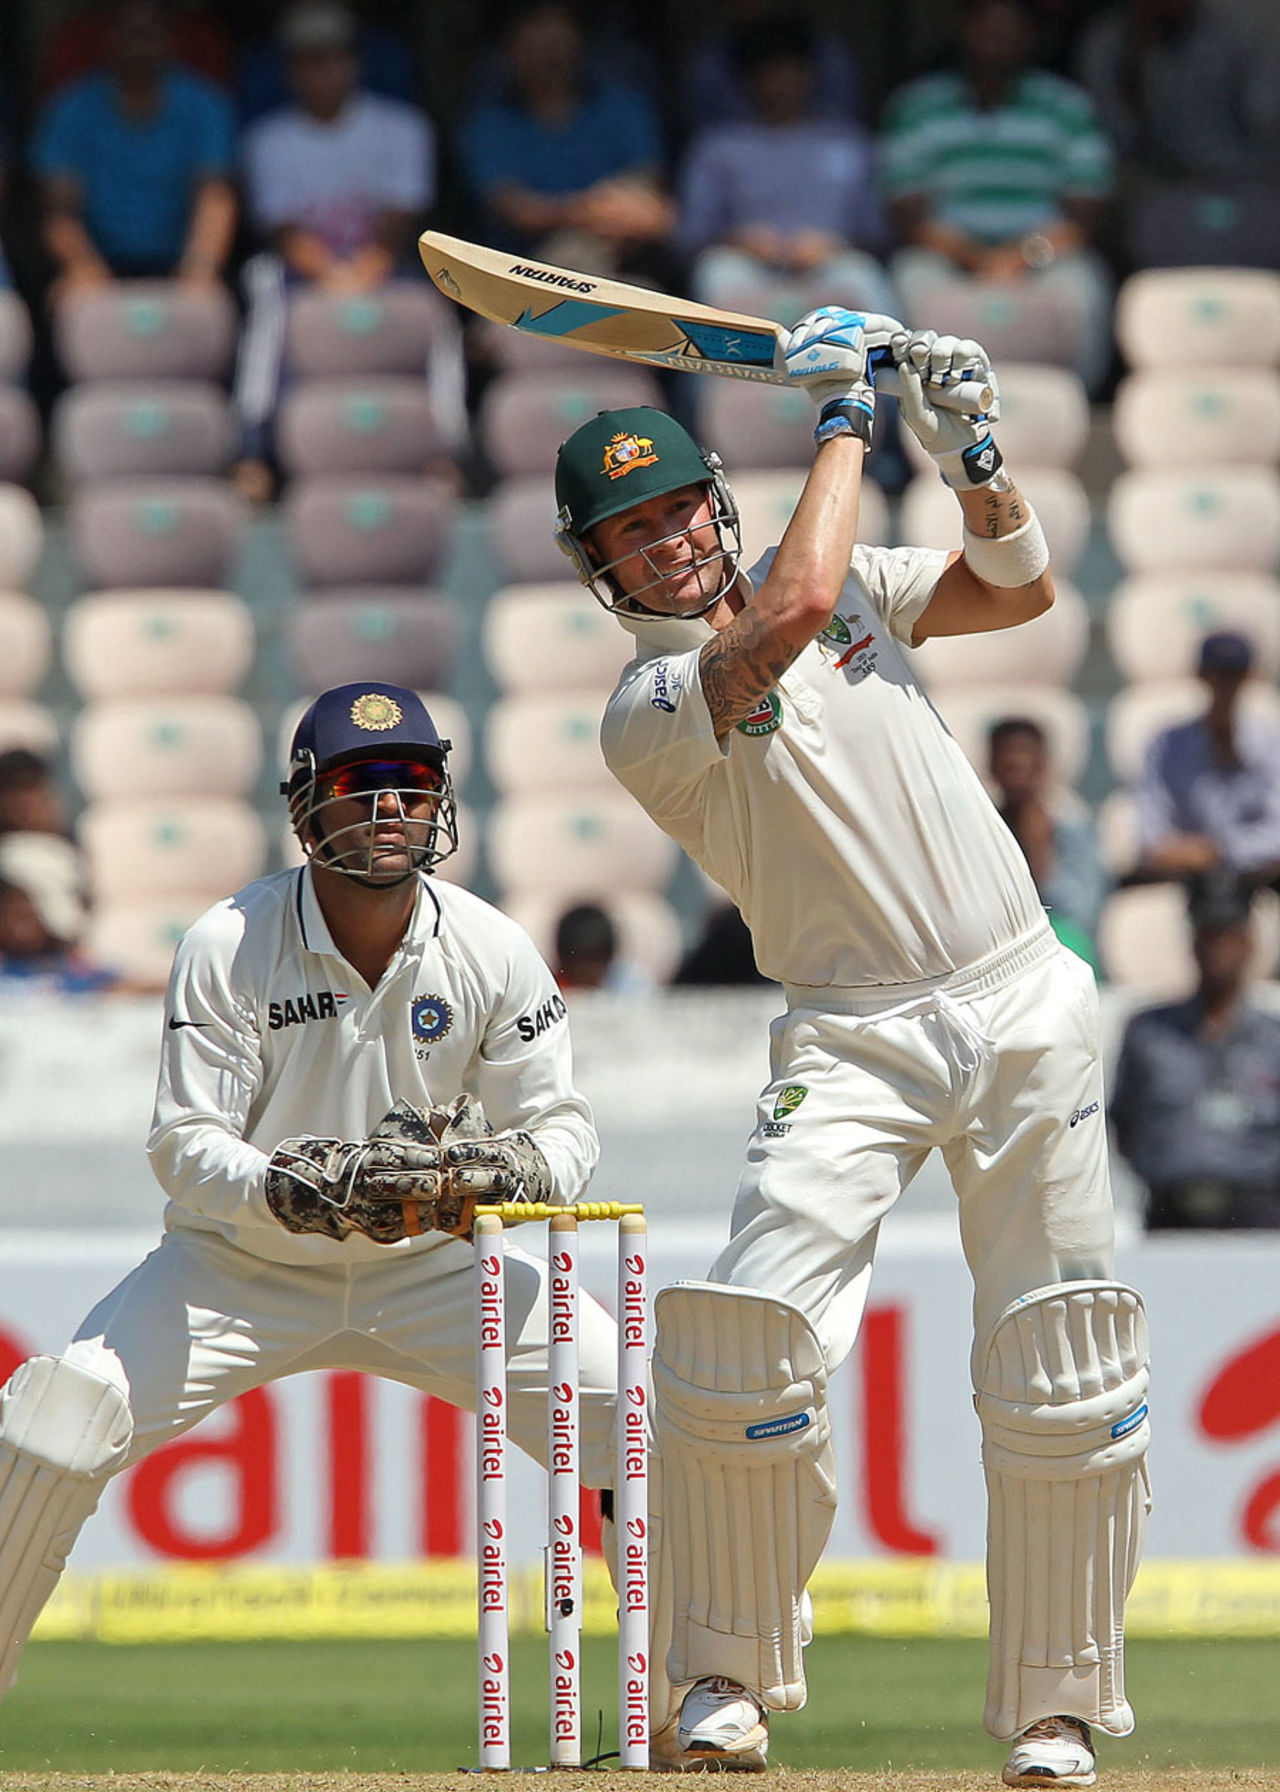 Michael Clarke scored yet another half-century, India v Australia, 2nd Test, Hyderabad, 1st day, March 2, 2013